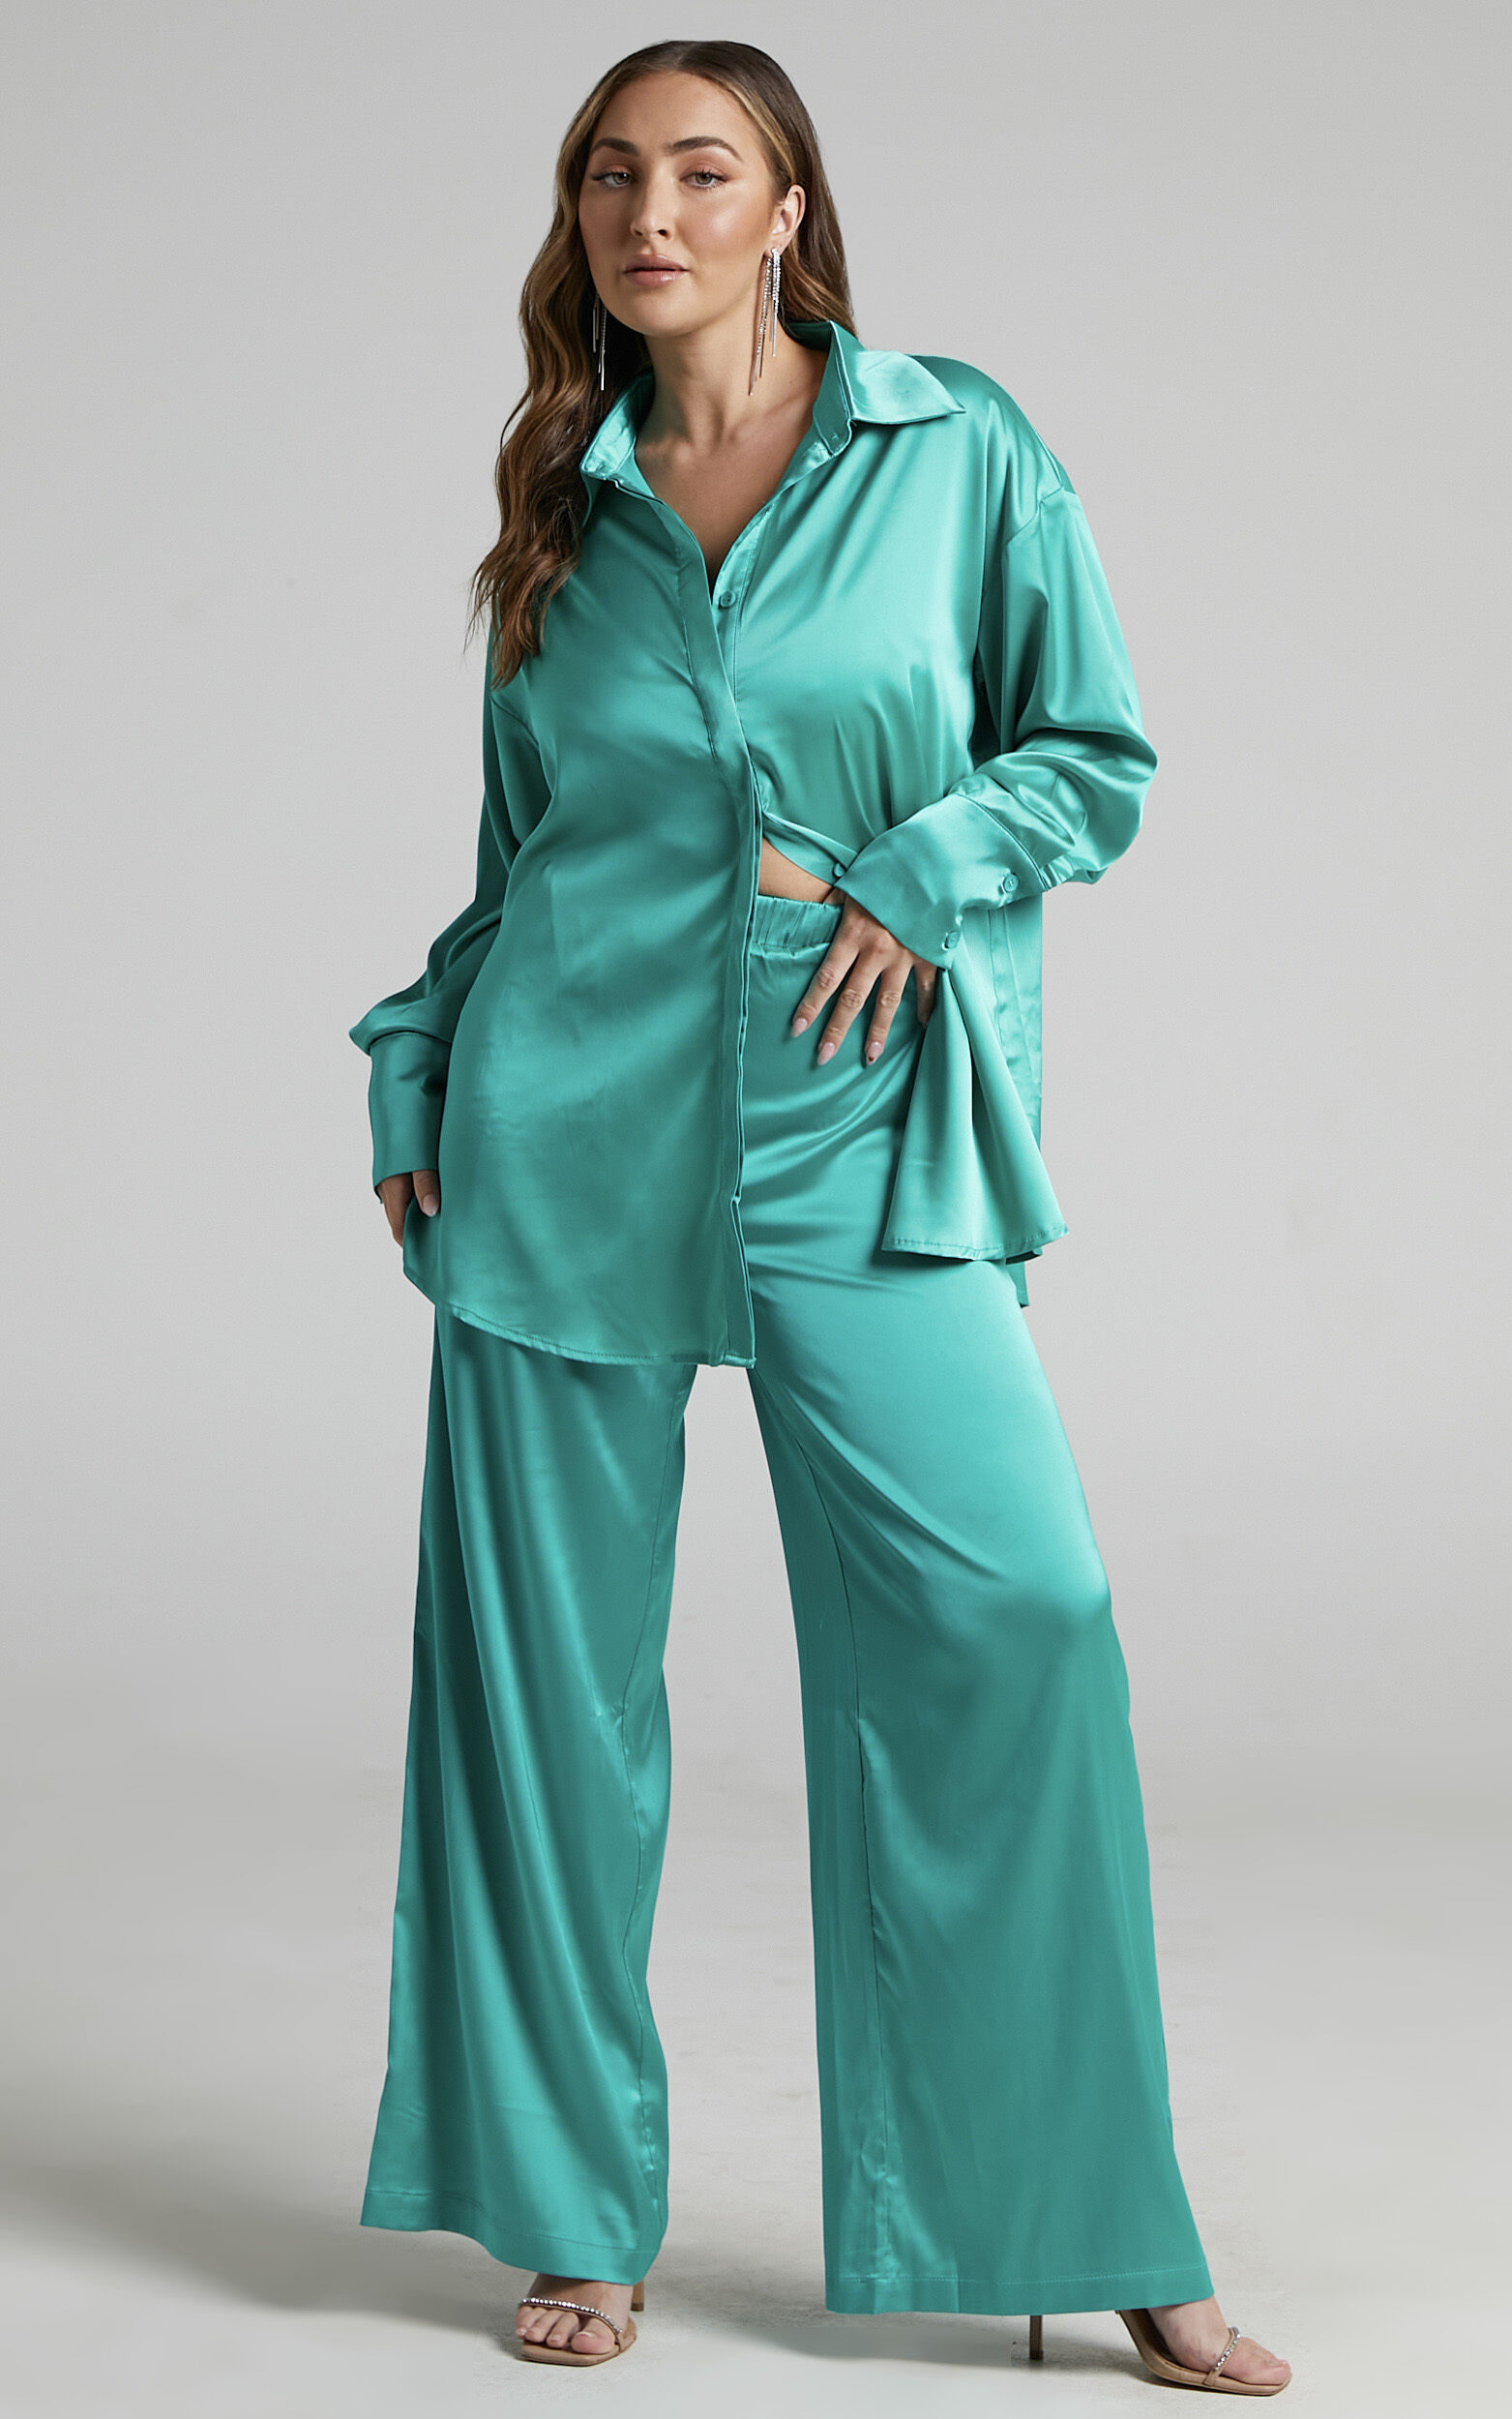 Trianna Two Piece Set - Oversized Satin Shirt and Wide Leg Pants in Jade - 04, BLU1, super-hi-res image number null